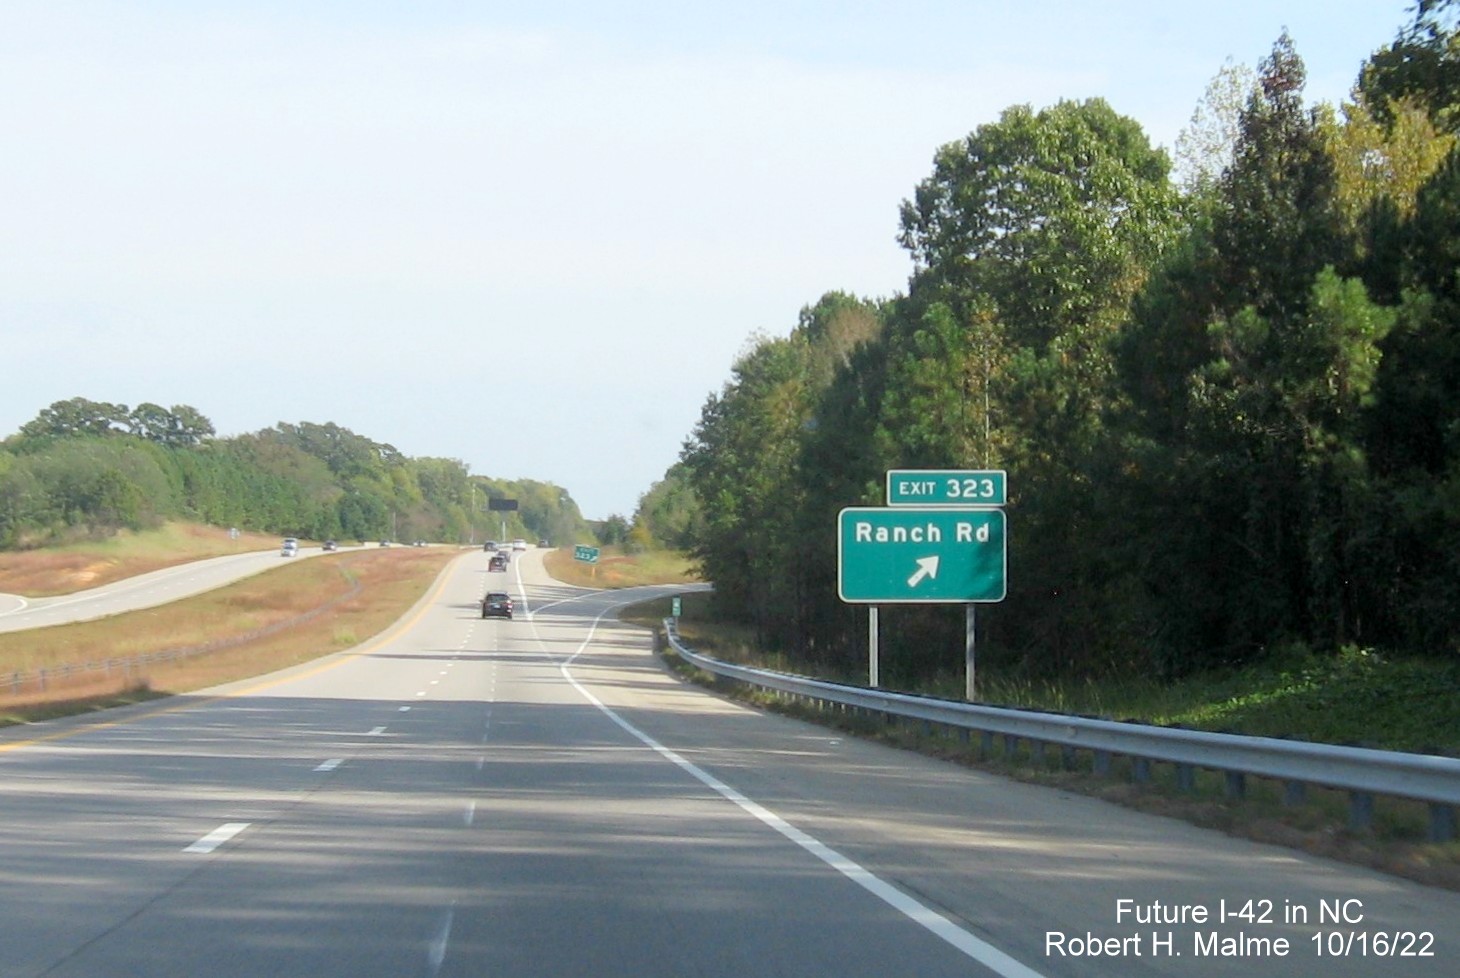 Image of ground mounted ramp sign for Ranch Road exit on US 70 (Future I-42) East Clayton Bypass, October 2022